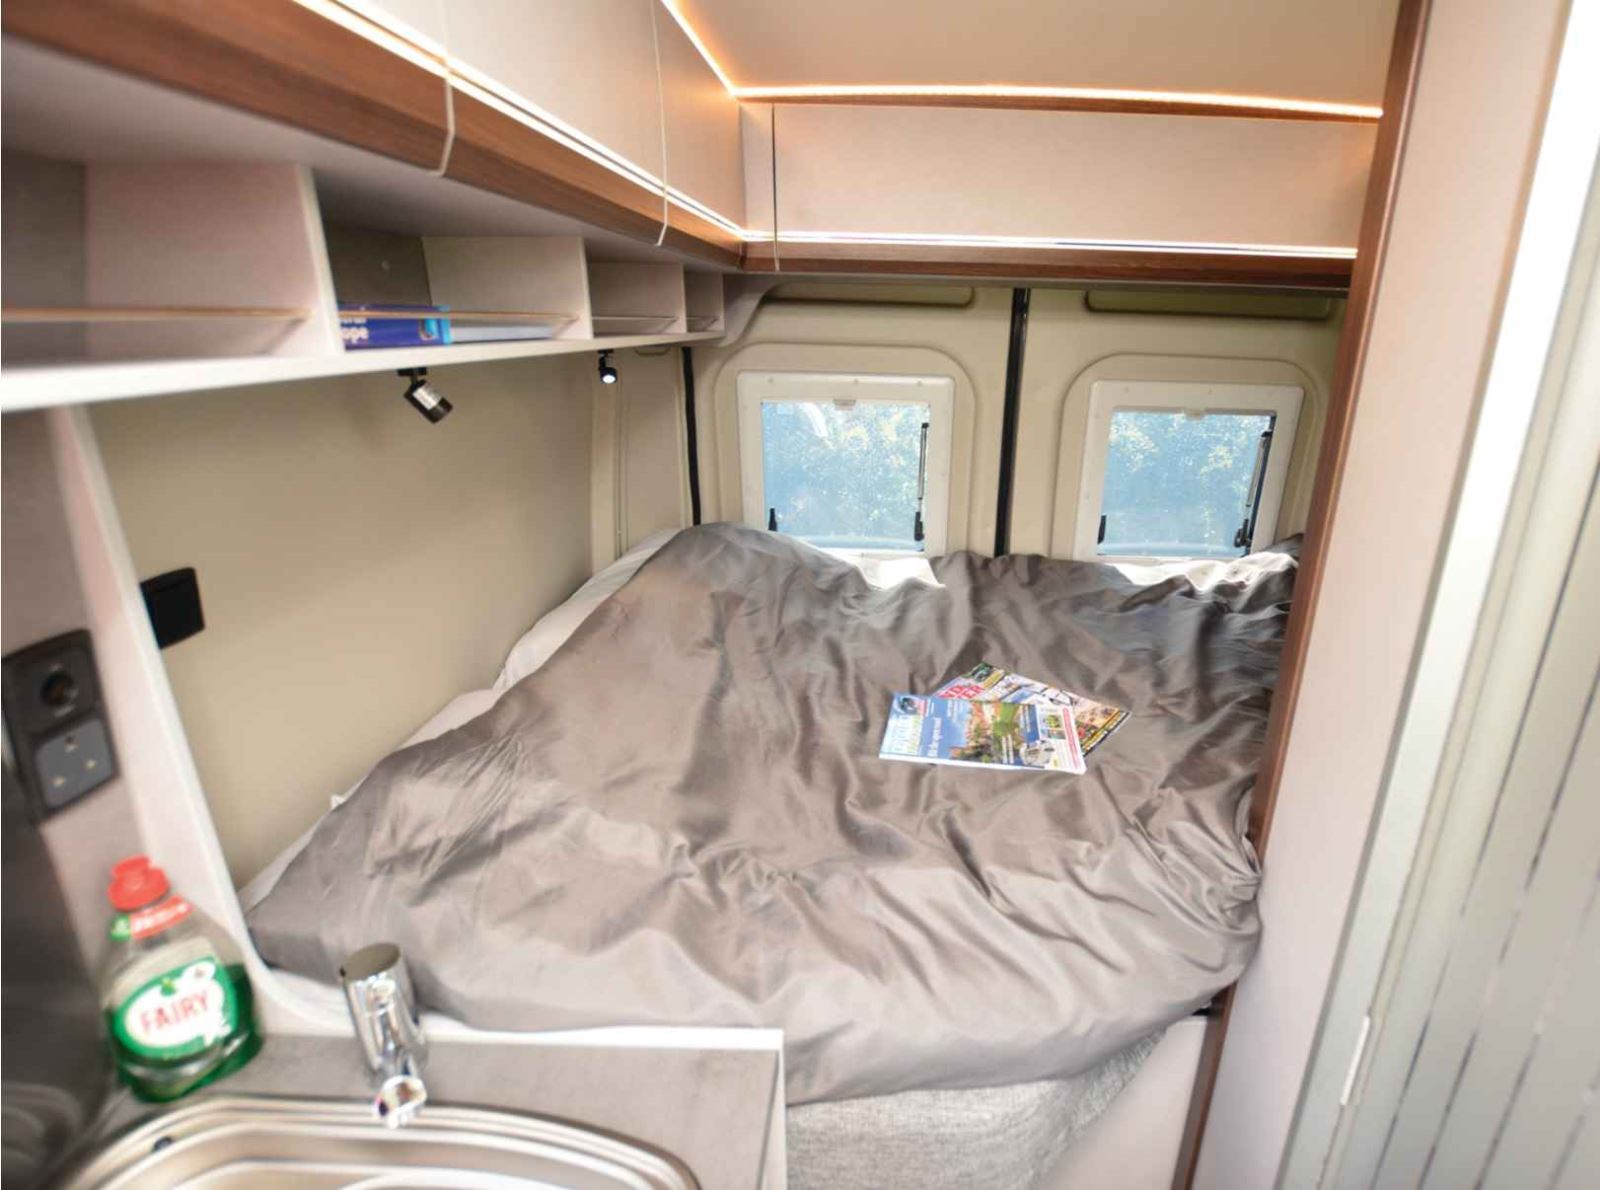 The bed inside the Globecar Summit Shine 540